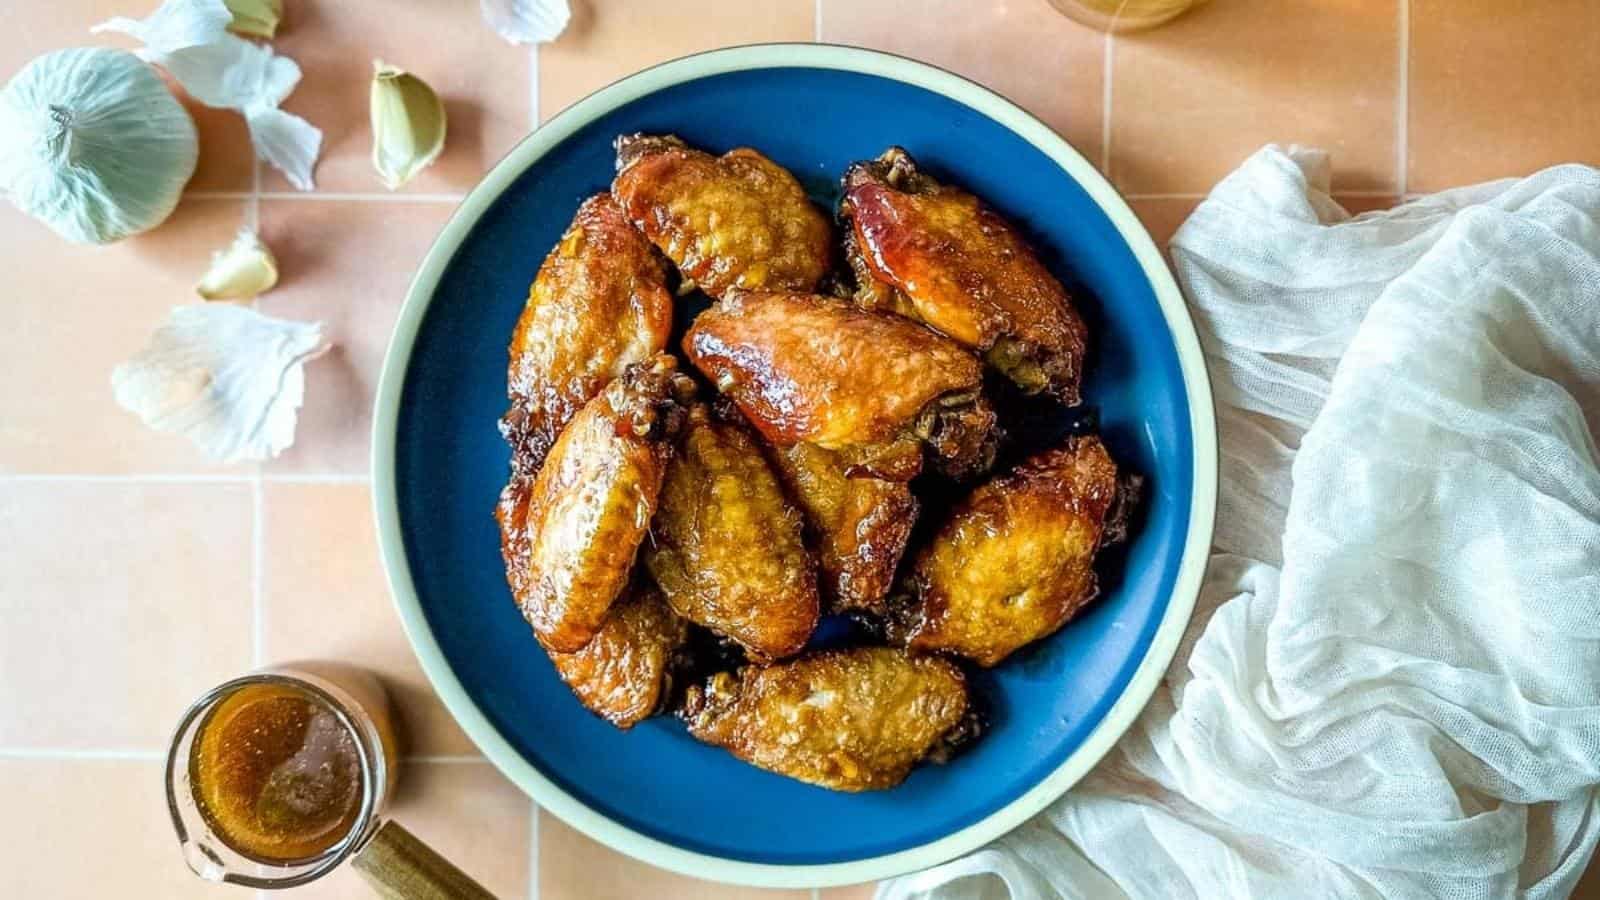 Soy garlic wings on a blue plate.